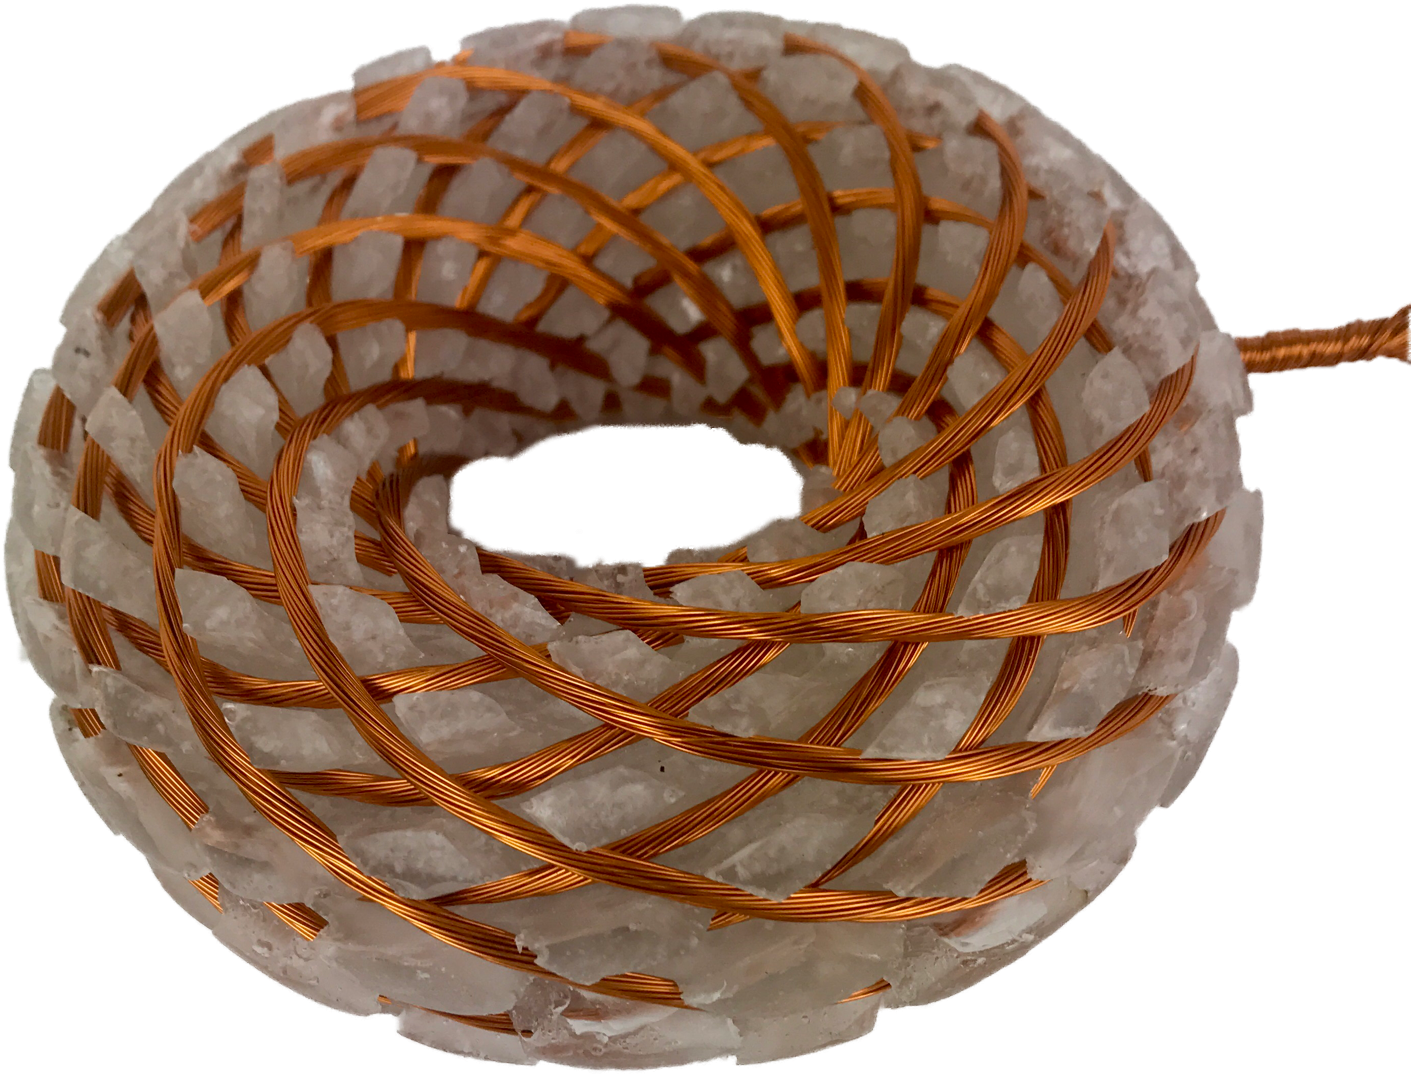 Abstract Copper Wire Doughnut Sculpture.png PNG